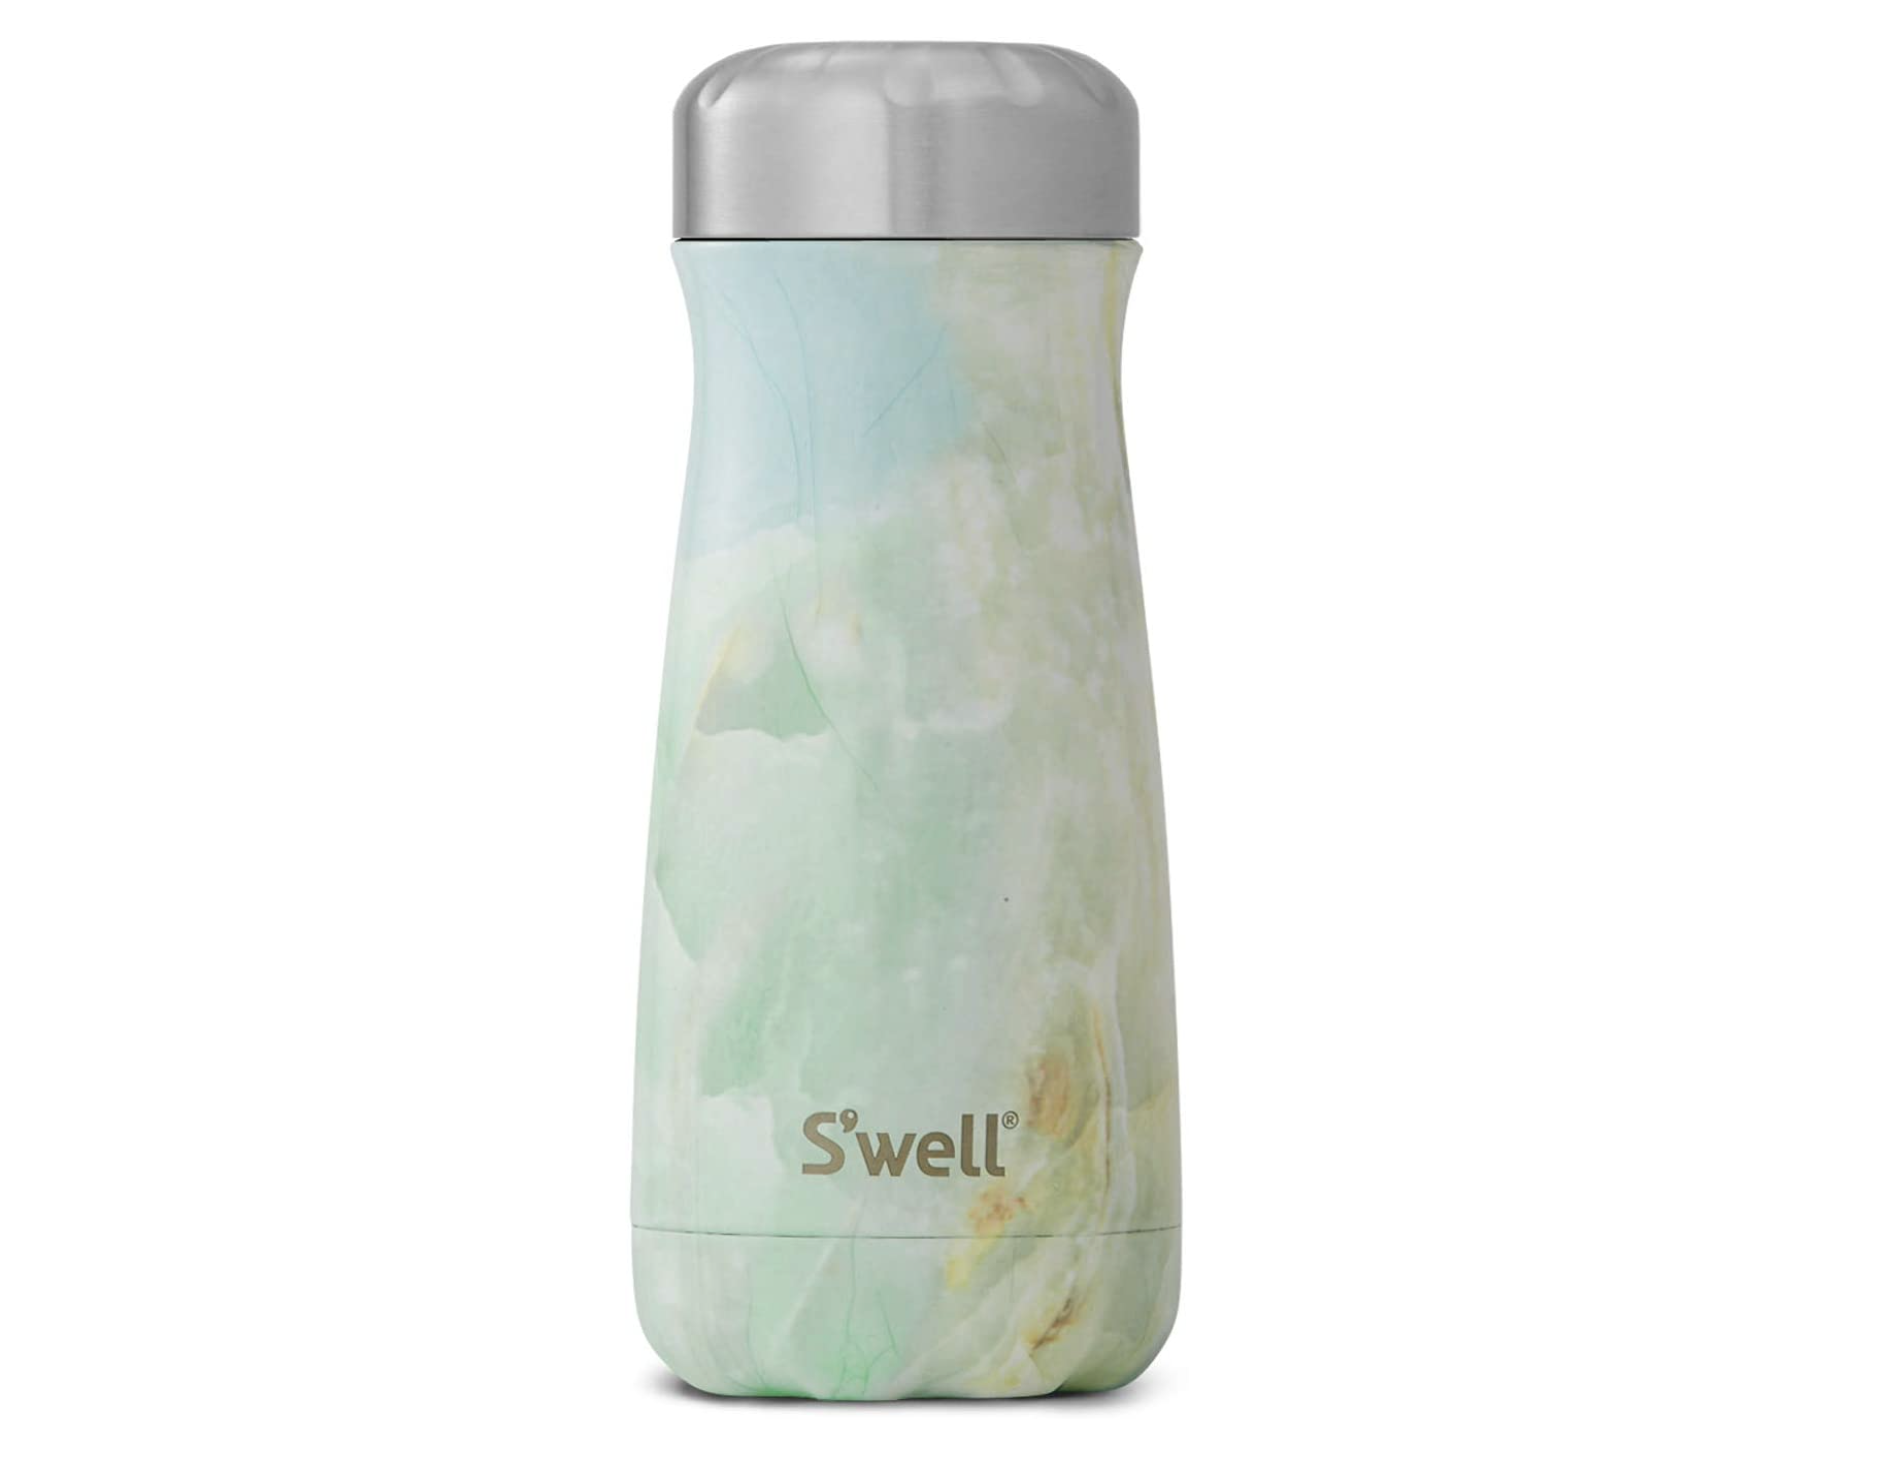 Swell Stainless Steel Traveler Travel Mug  16 Fl Oz  Rose Agate  Triple-Layered Vacuum Insulated Containers Keeps Drinks Cold for 24 Hours and Hot for 12  BPA Free Travel Water Bottle swirl green.png